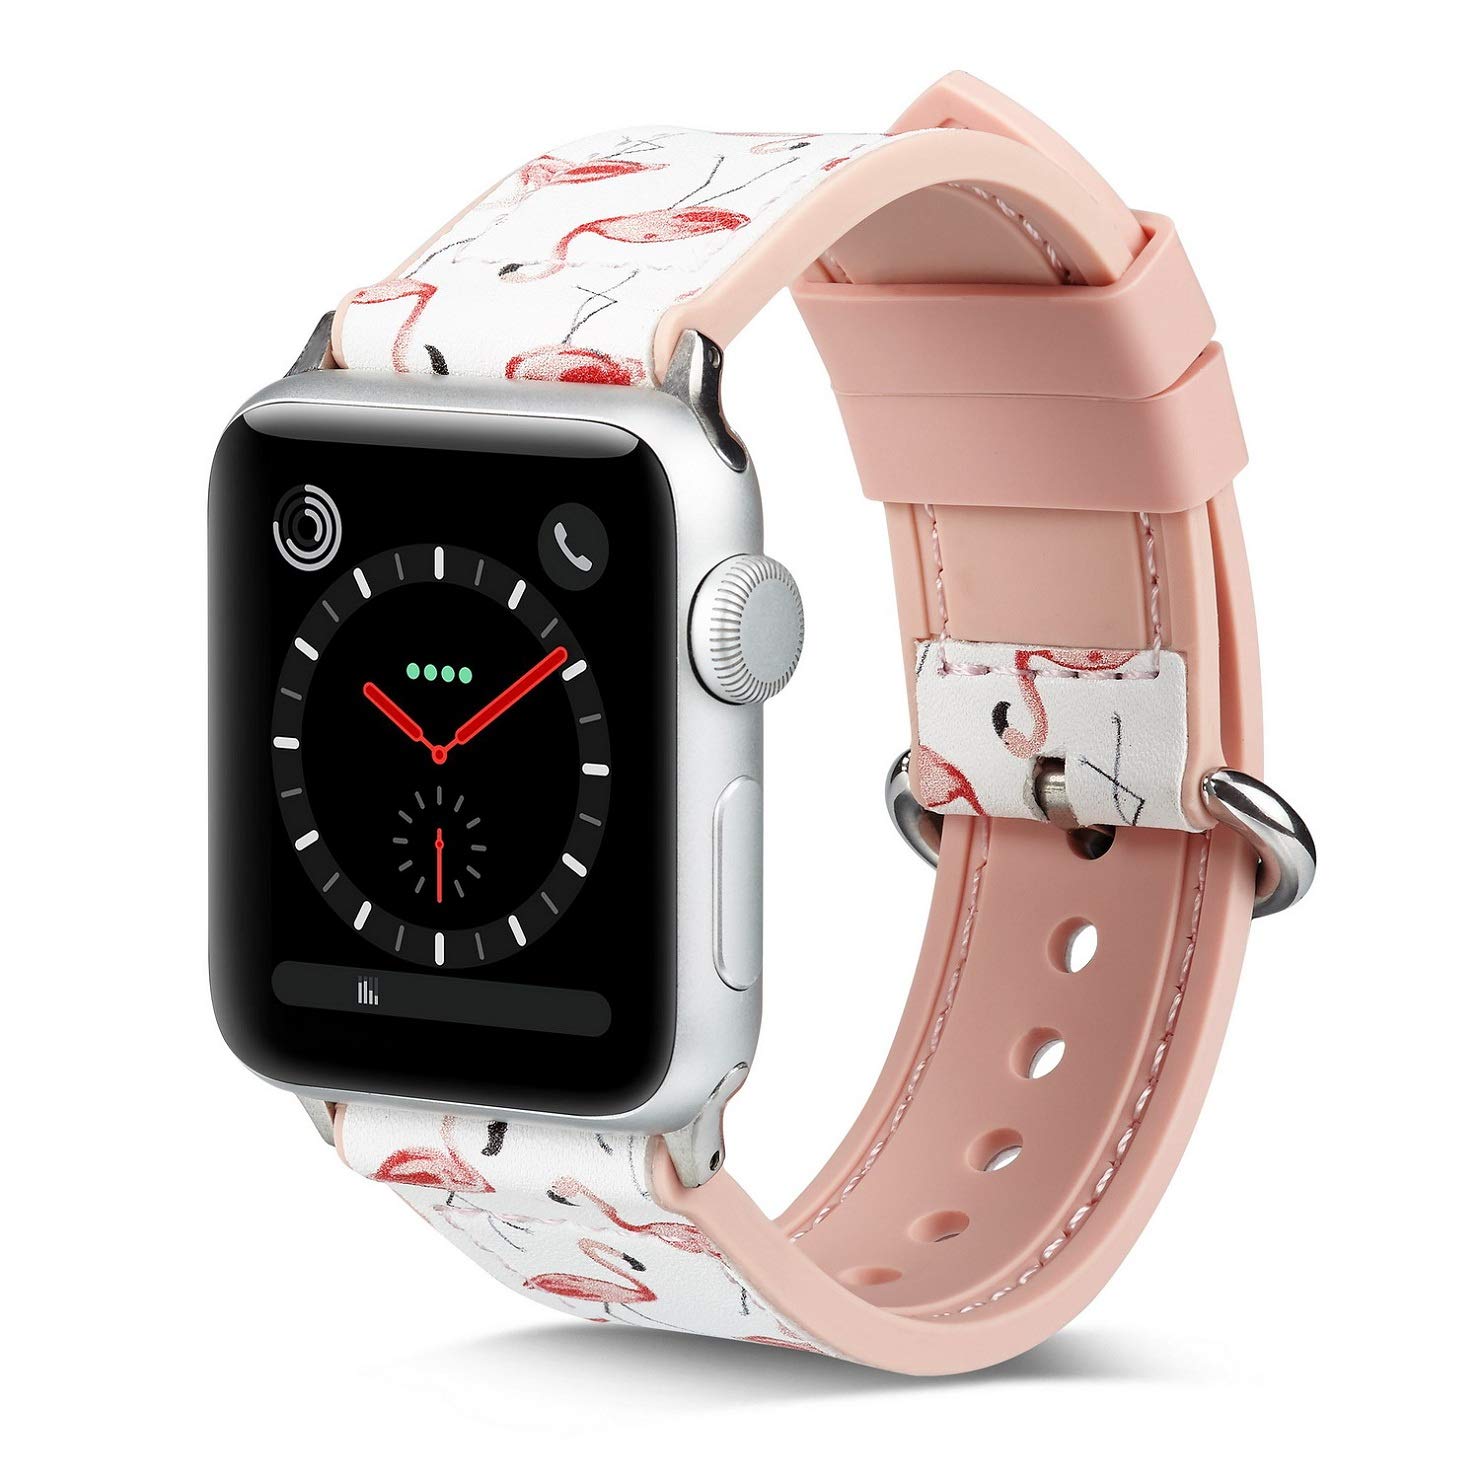 Juzzhou Watch Band For Apple Watch iWatch 38/40/42/44mm Series 1/2/3/4 Soft Silicone Leather Replacement With Adapter